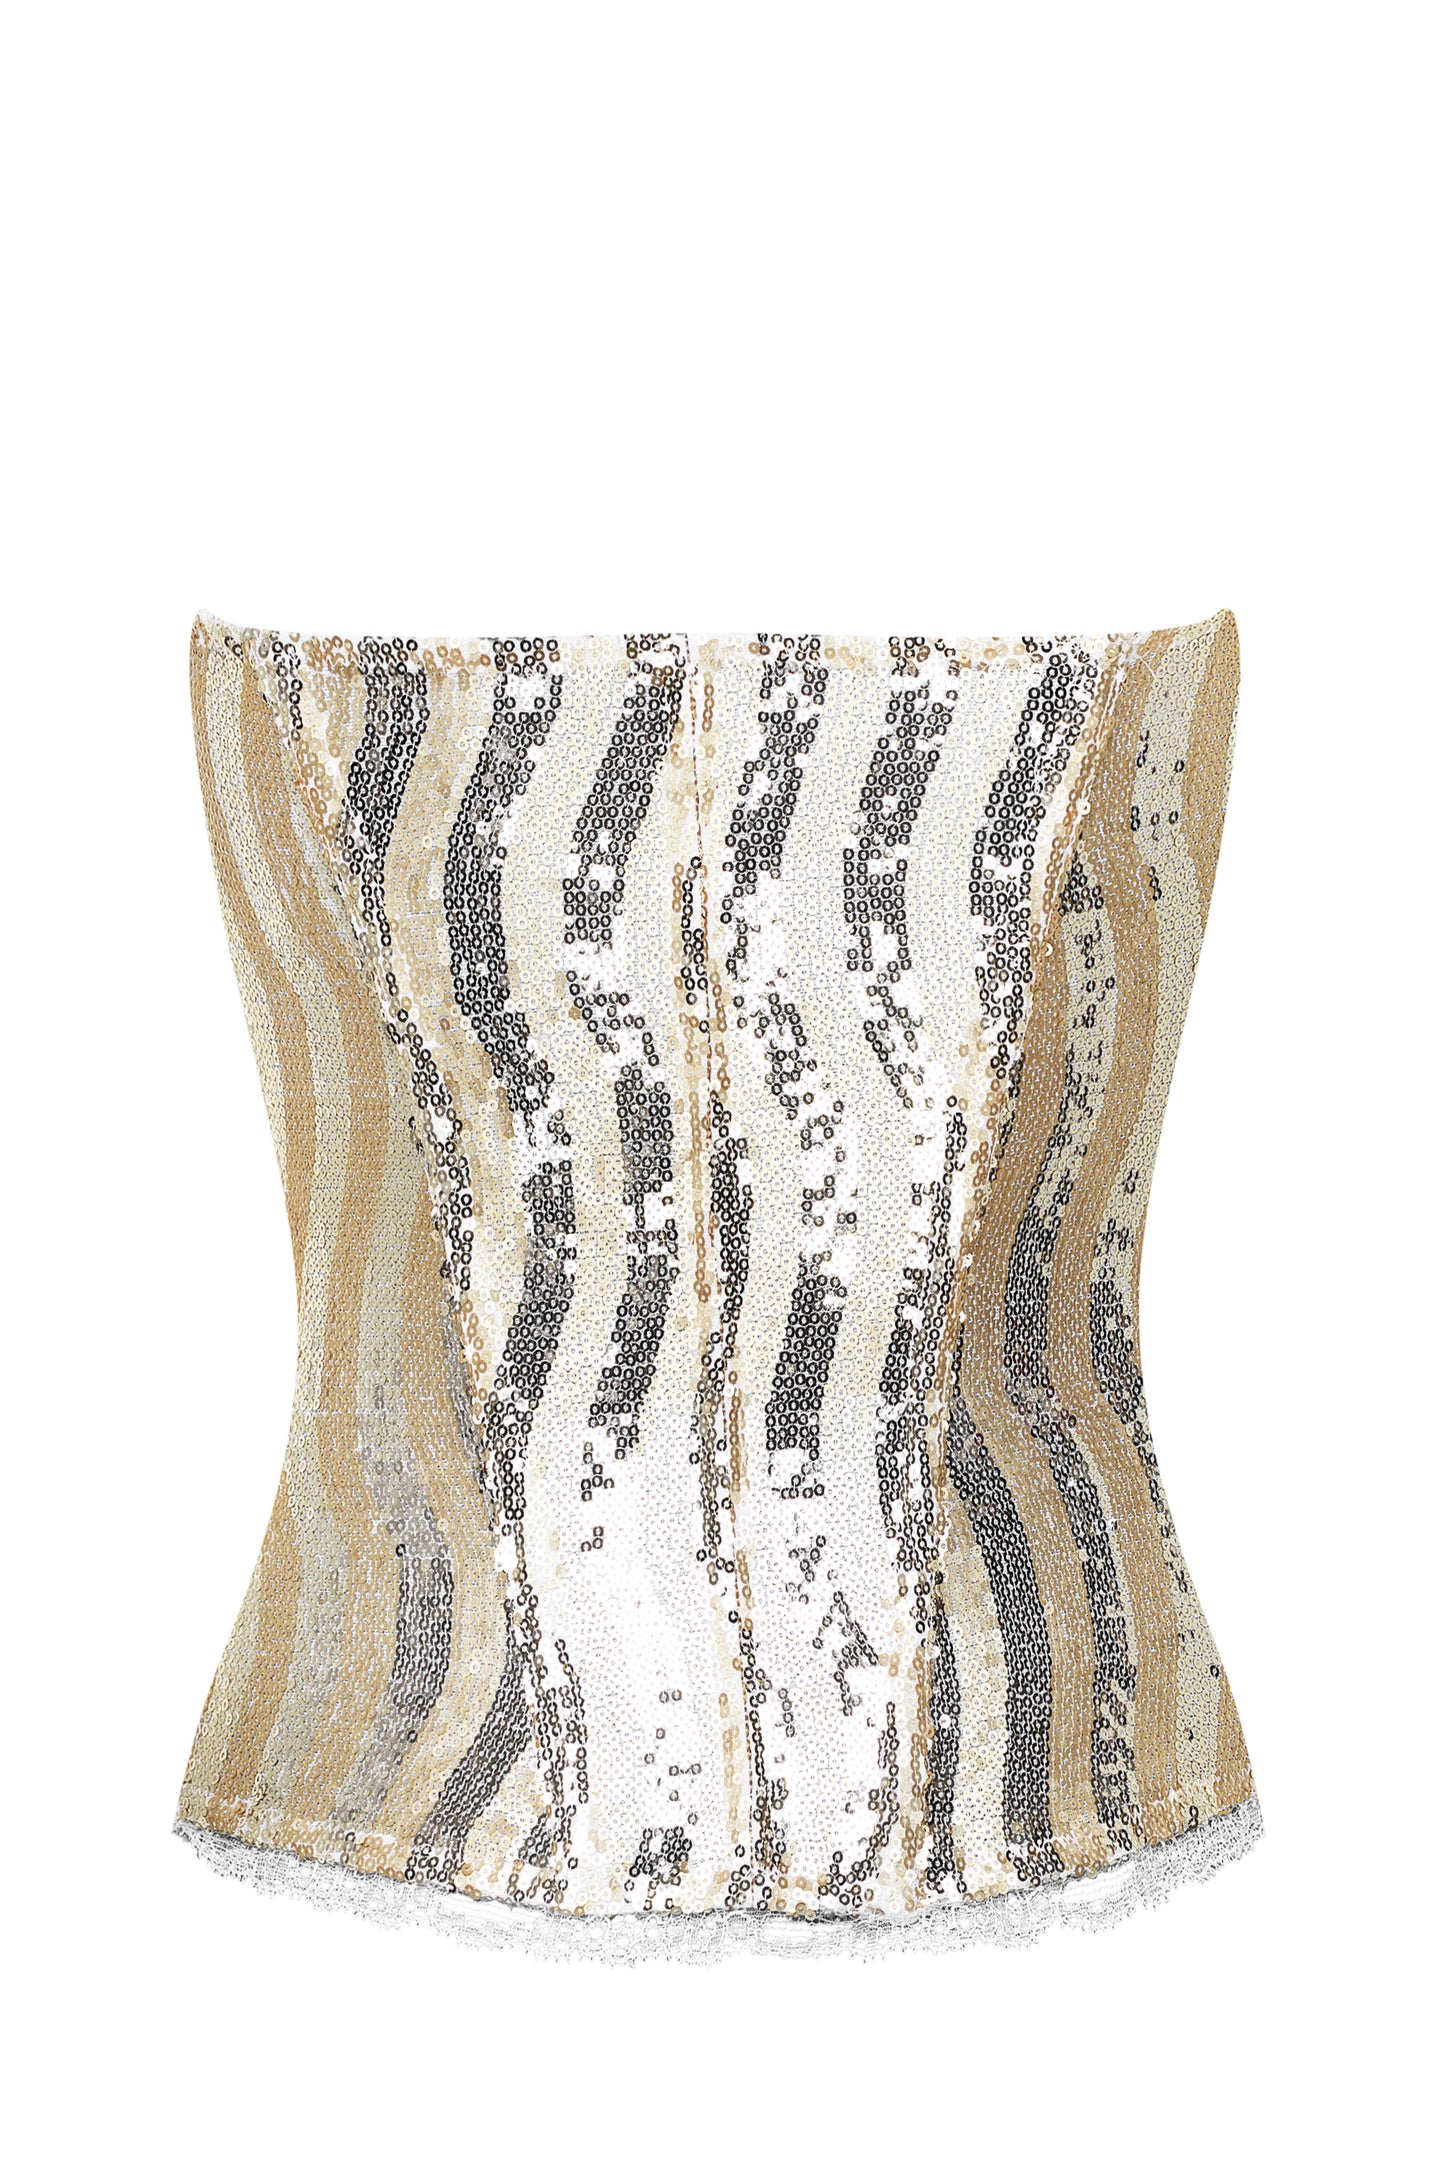 traditional corset made the French way. It has gold sequins front and back and shimmers in the light. 